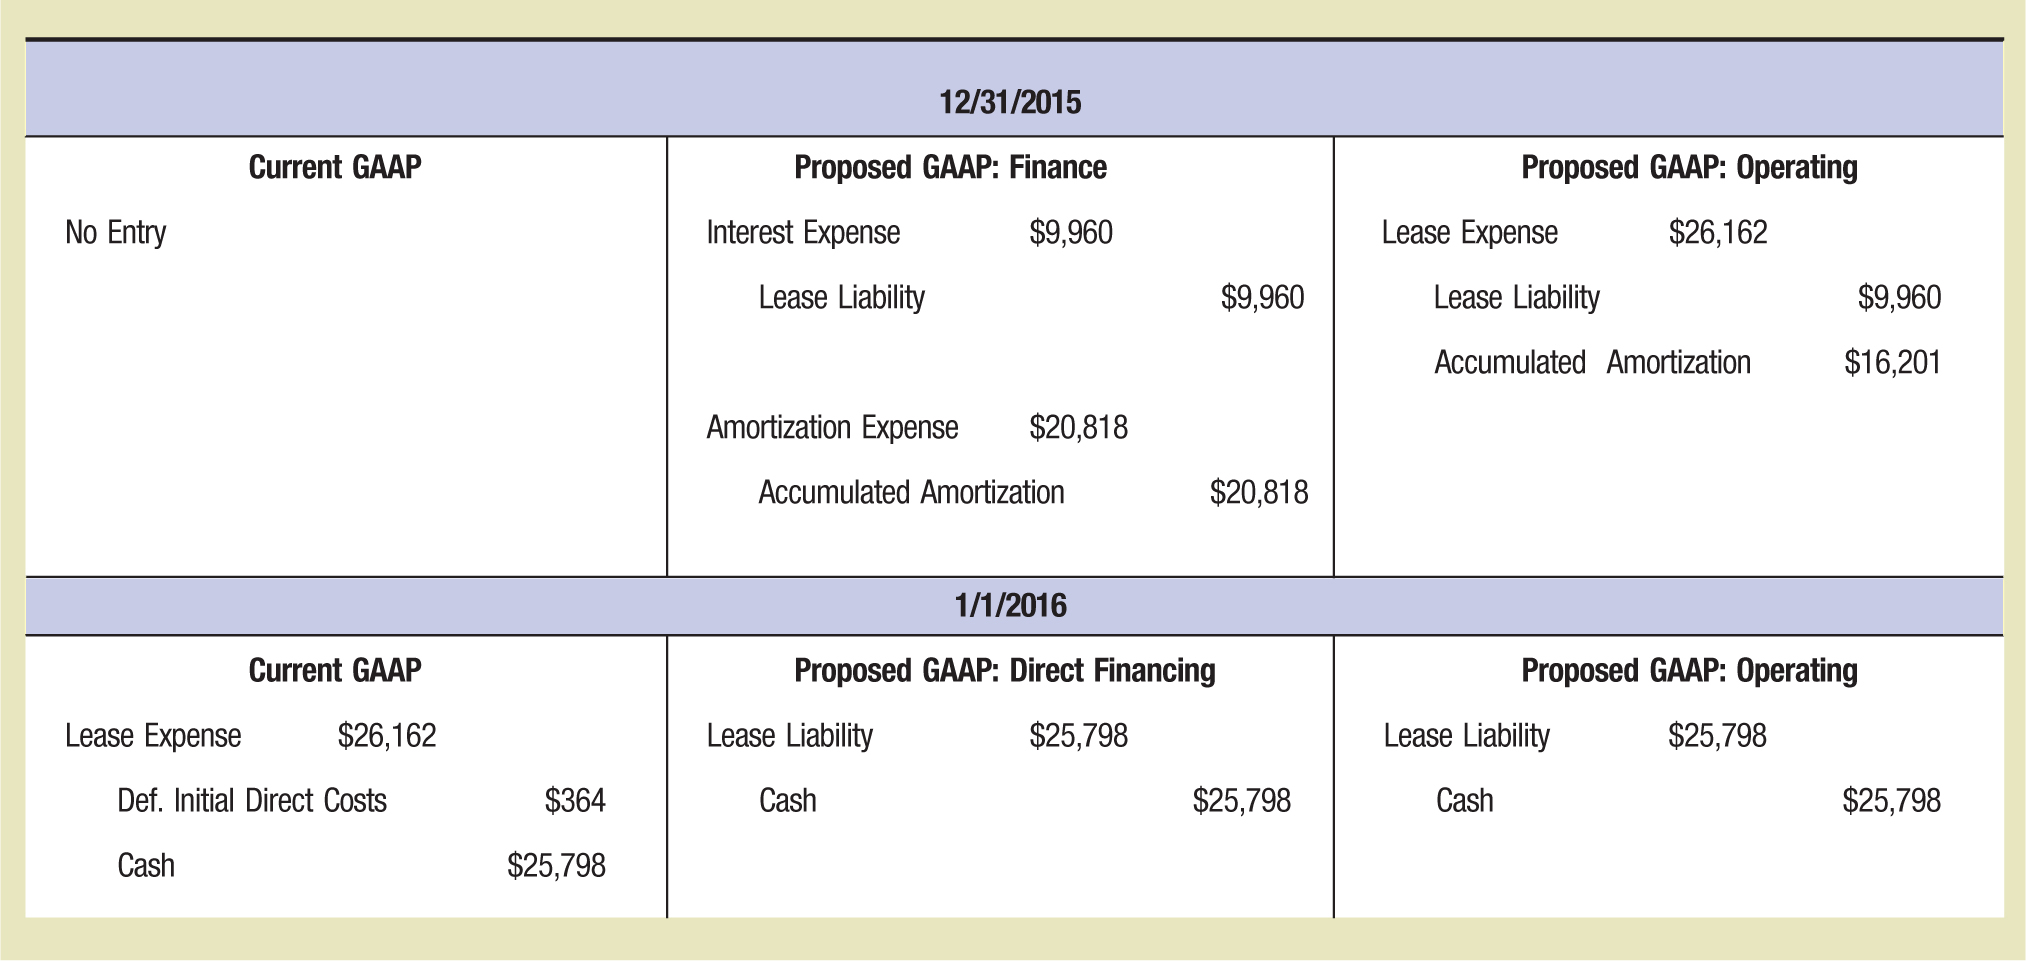  12/31/2015 Current GAAP Proposed GAAP: Finance Proposed GAAP: Operating No Entry Interest Expense $9,960 Lease Expense $26,162 Lease Liability $9,960 Lease Liability $9,960 Accumulated Amortization $16,201 Amortization Expense $20,818 Accumulated Amortization $20,818 1/1/2016 Current GAAP Proposed GAAP: Direct Financing Proposed GAAP: Operating Lease Expense $26,162 Lease Liability $25,798 Lease Liability $25,798 Def. Initial Direct Costs $364 Cash $25,798 Cash $25,798 Cash $25,798 